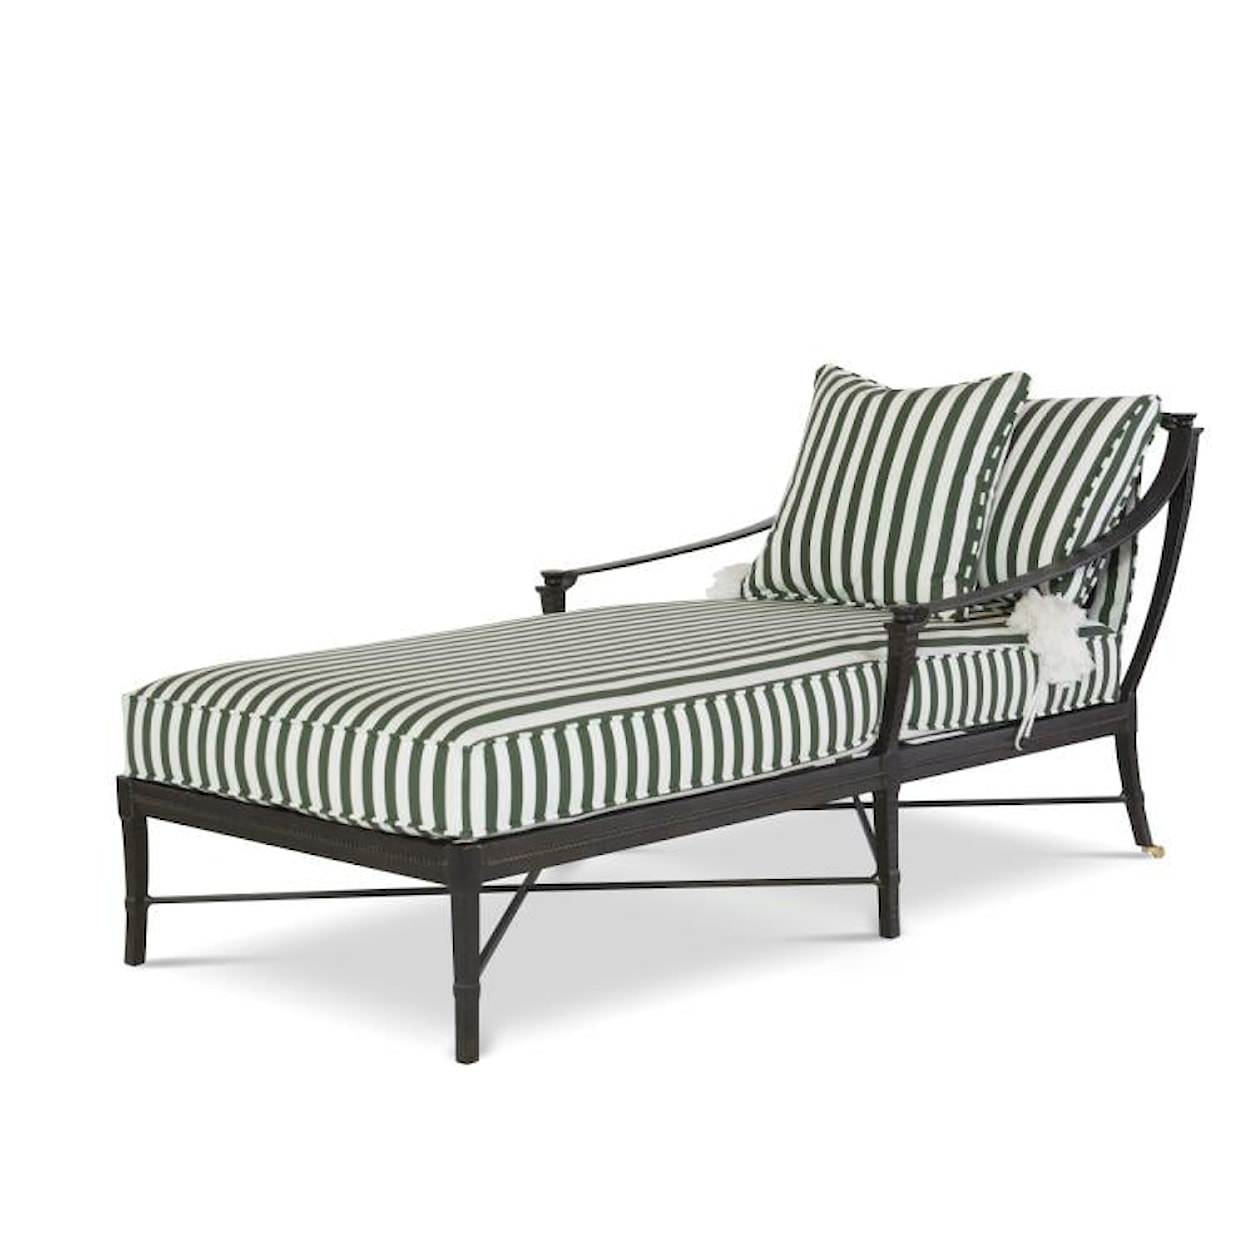 Century Andalusia Outdoor Lounge Chaise